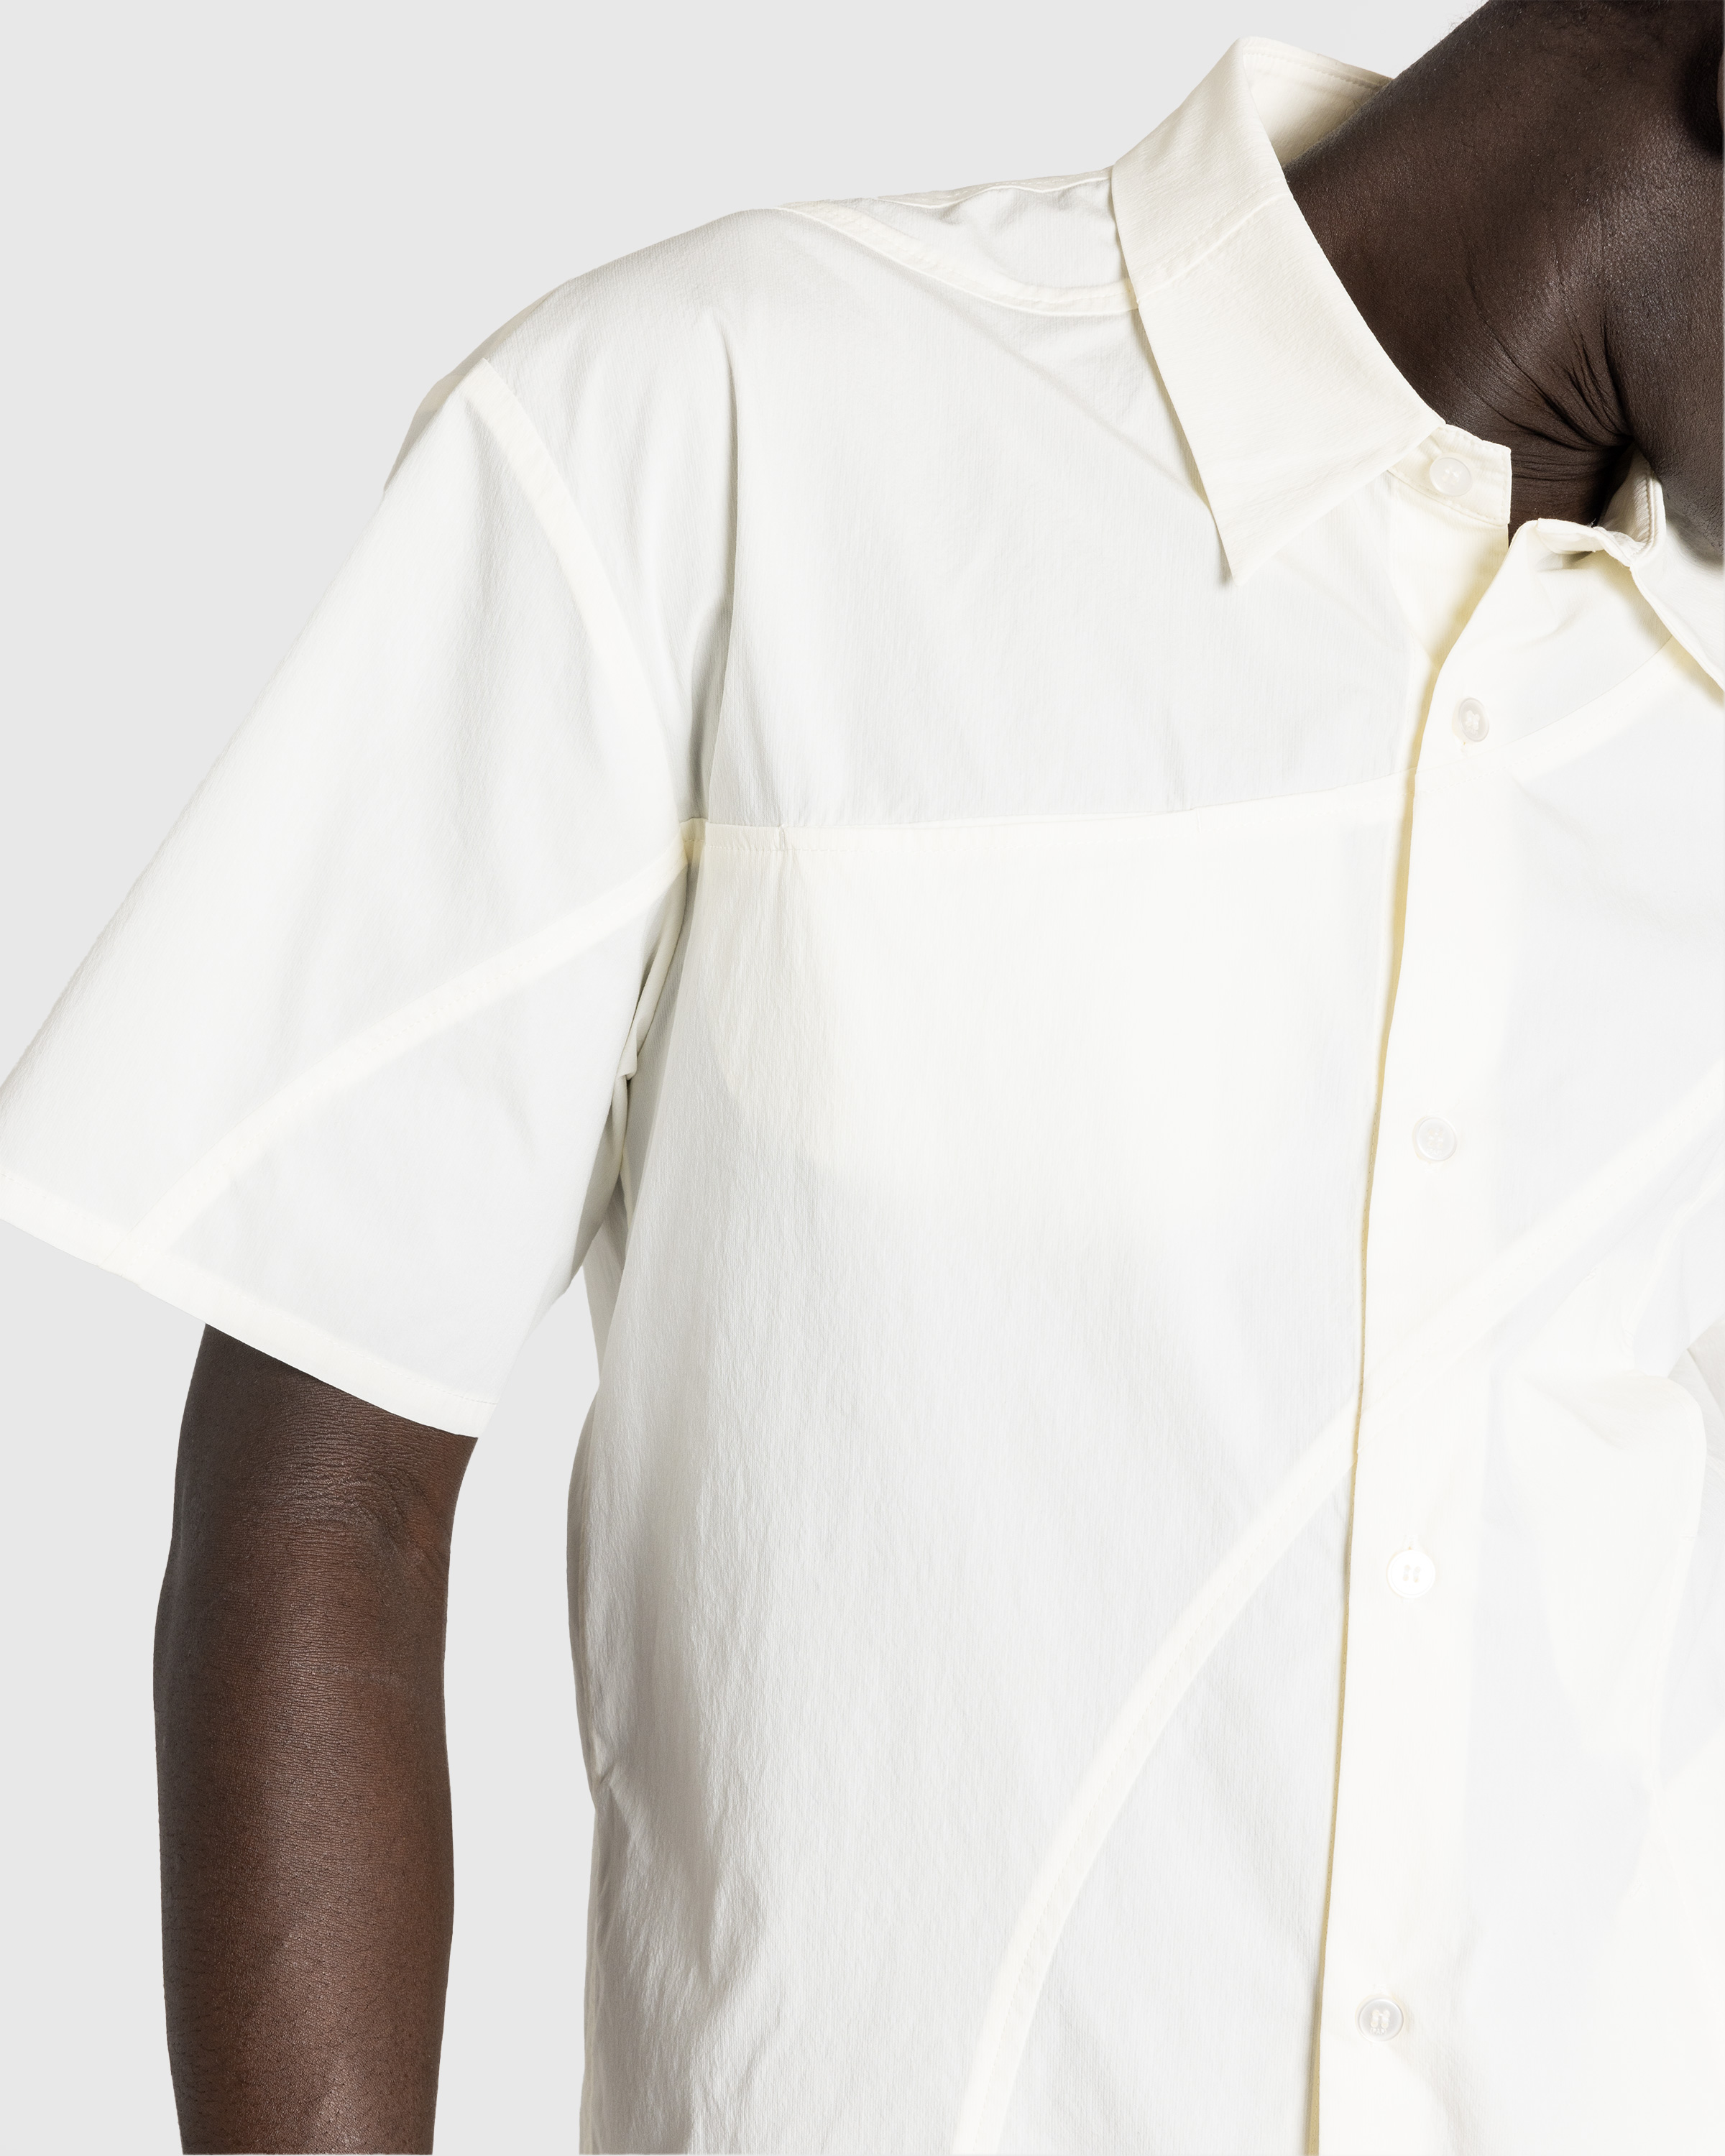 Post Archive Faction (PAF) – 6.0 Shirt Center White - Longsleeve Shirts - White - Image 5